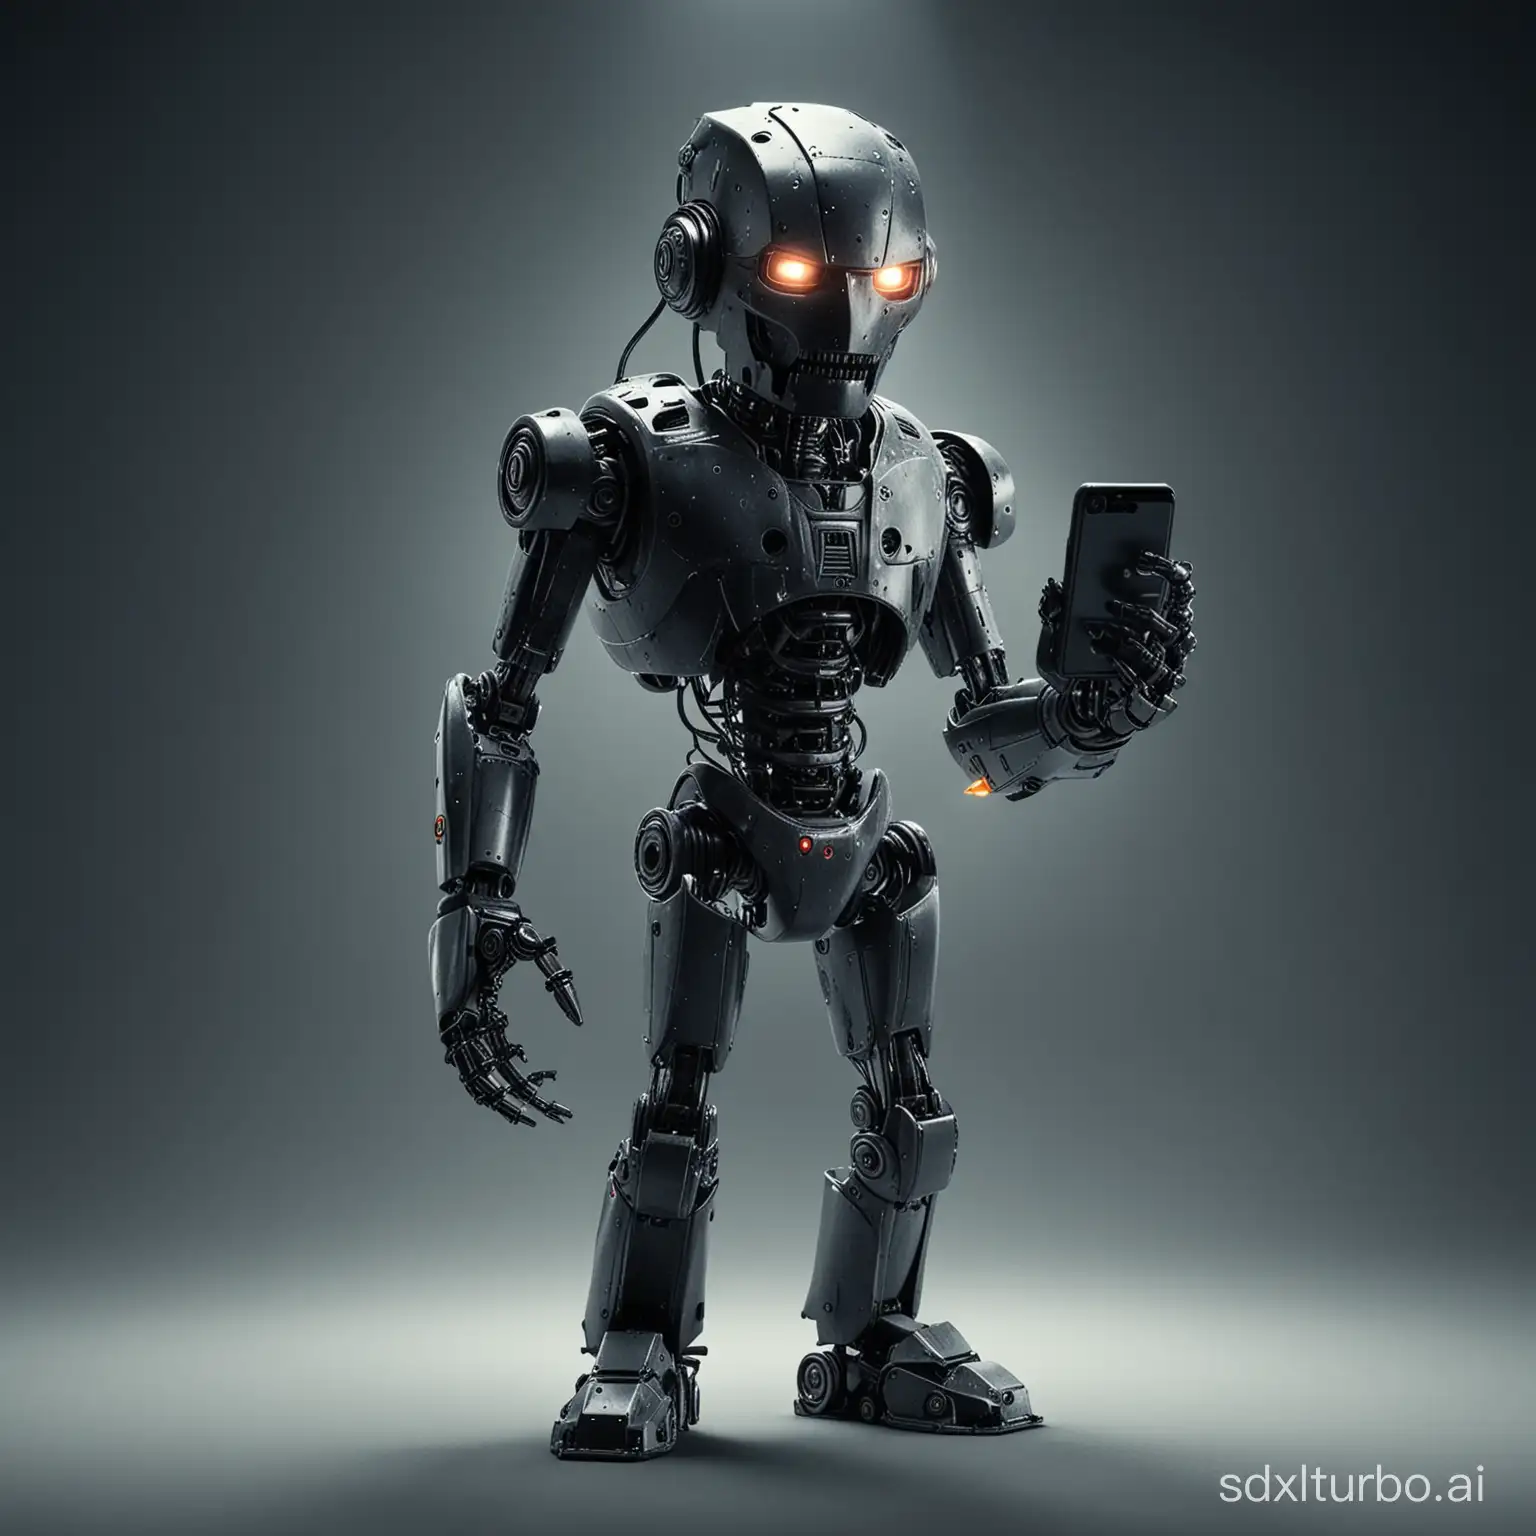 The evil robot is holding a phone in his hand, dramatic, cinematic lighting